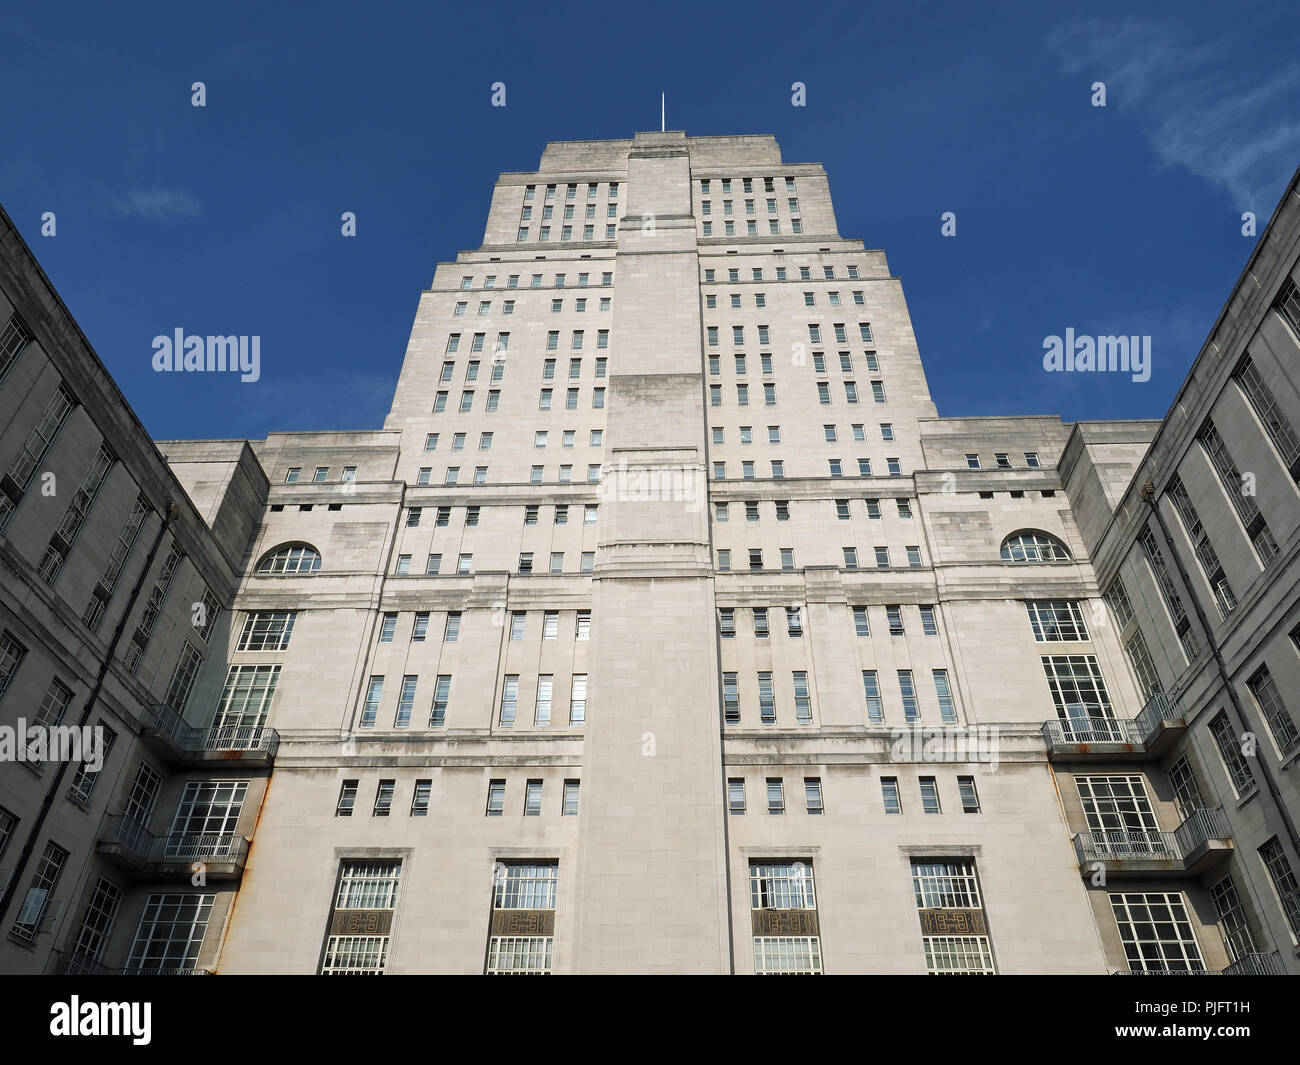 Front view looking up at Senate House the administrative centre of the University of London Stock Photo